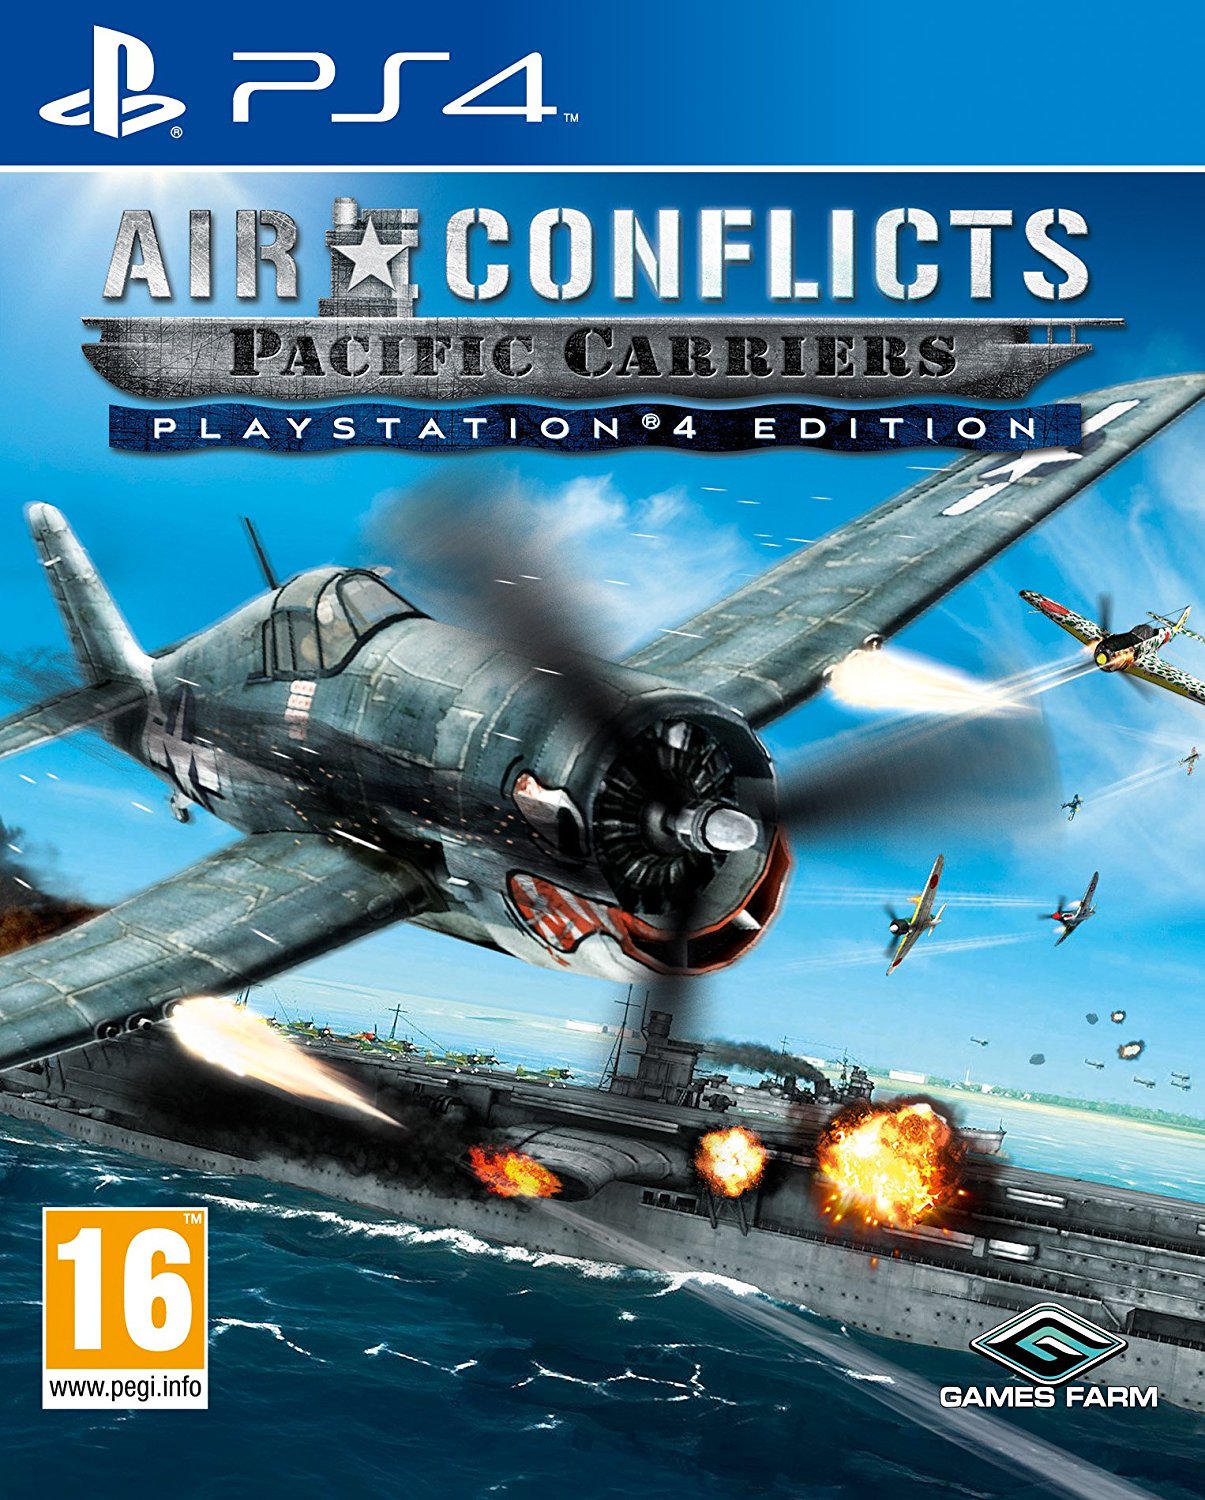 Air Conflicts Pacific Carriers - PlayStation 4 Játékok